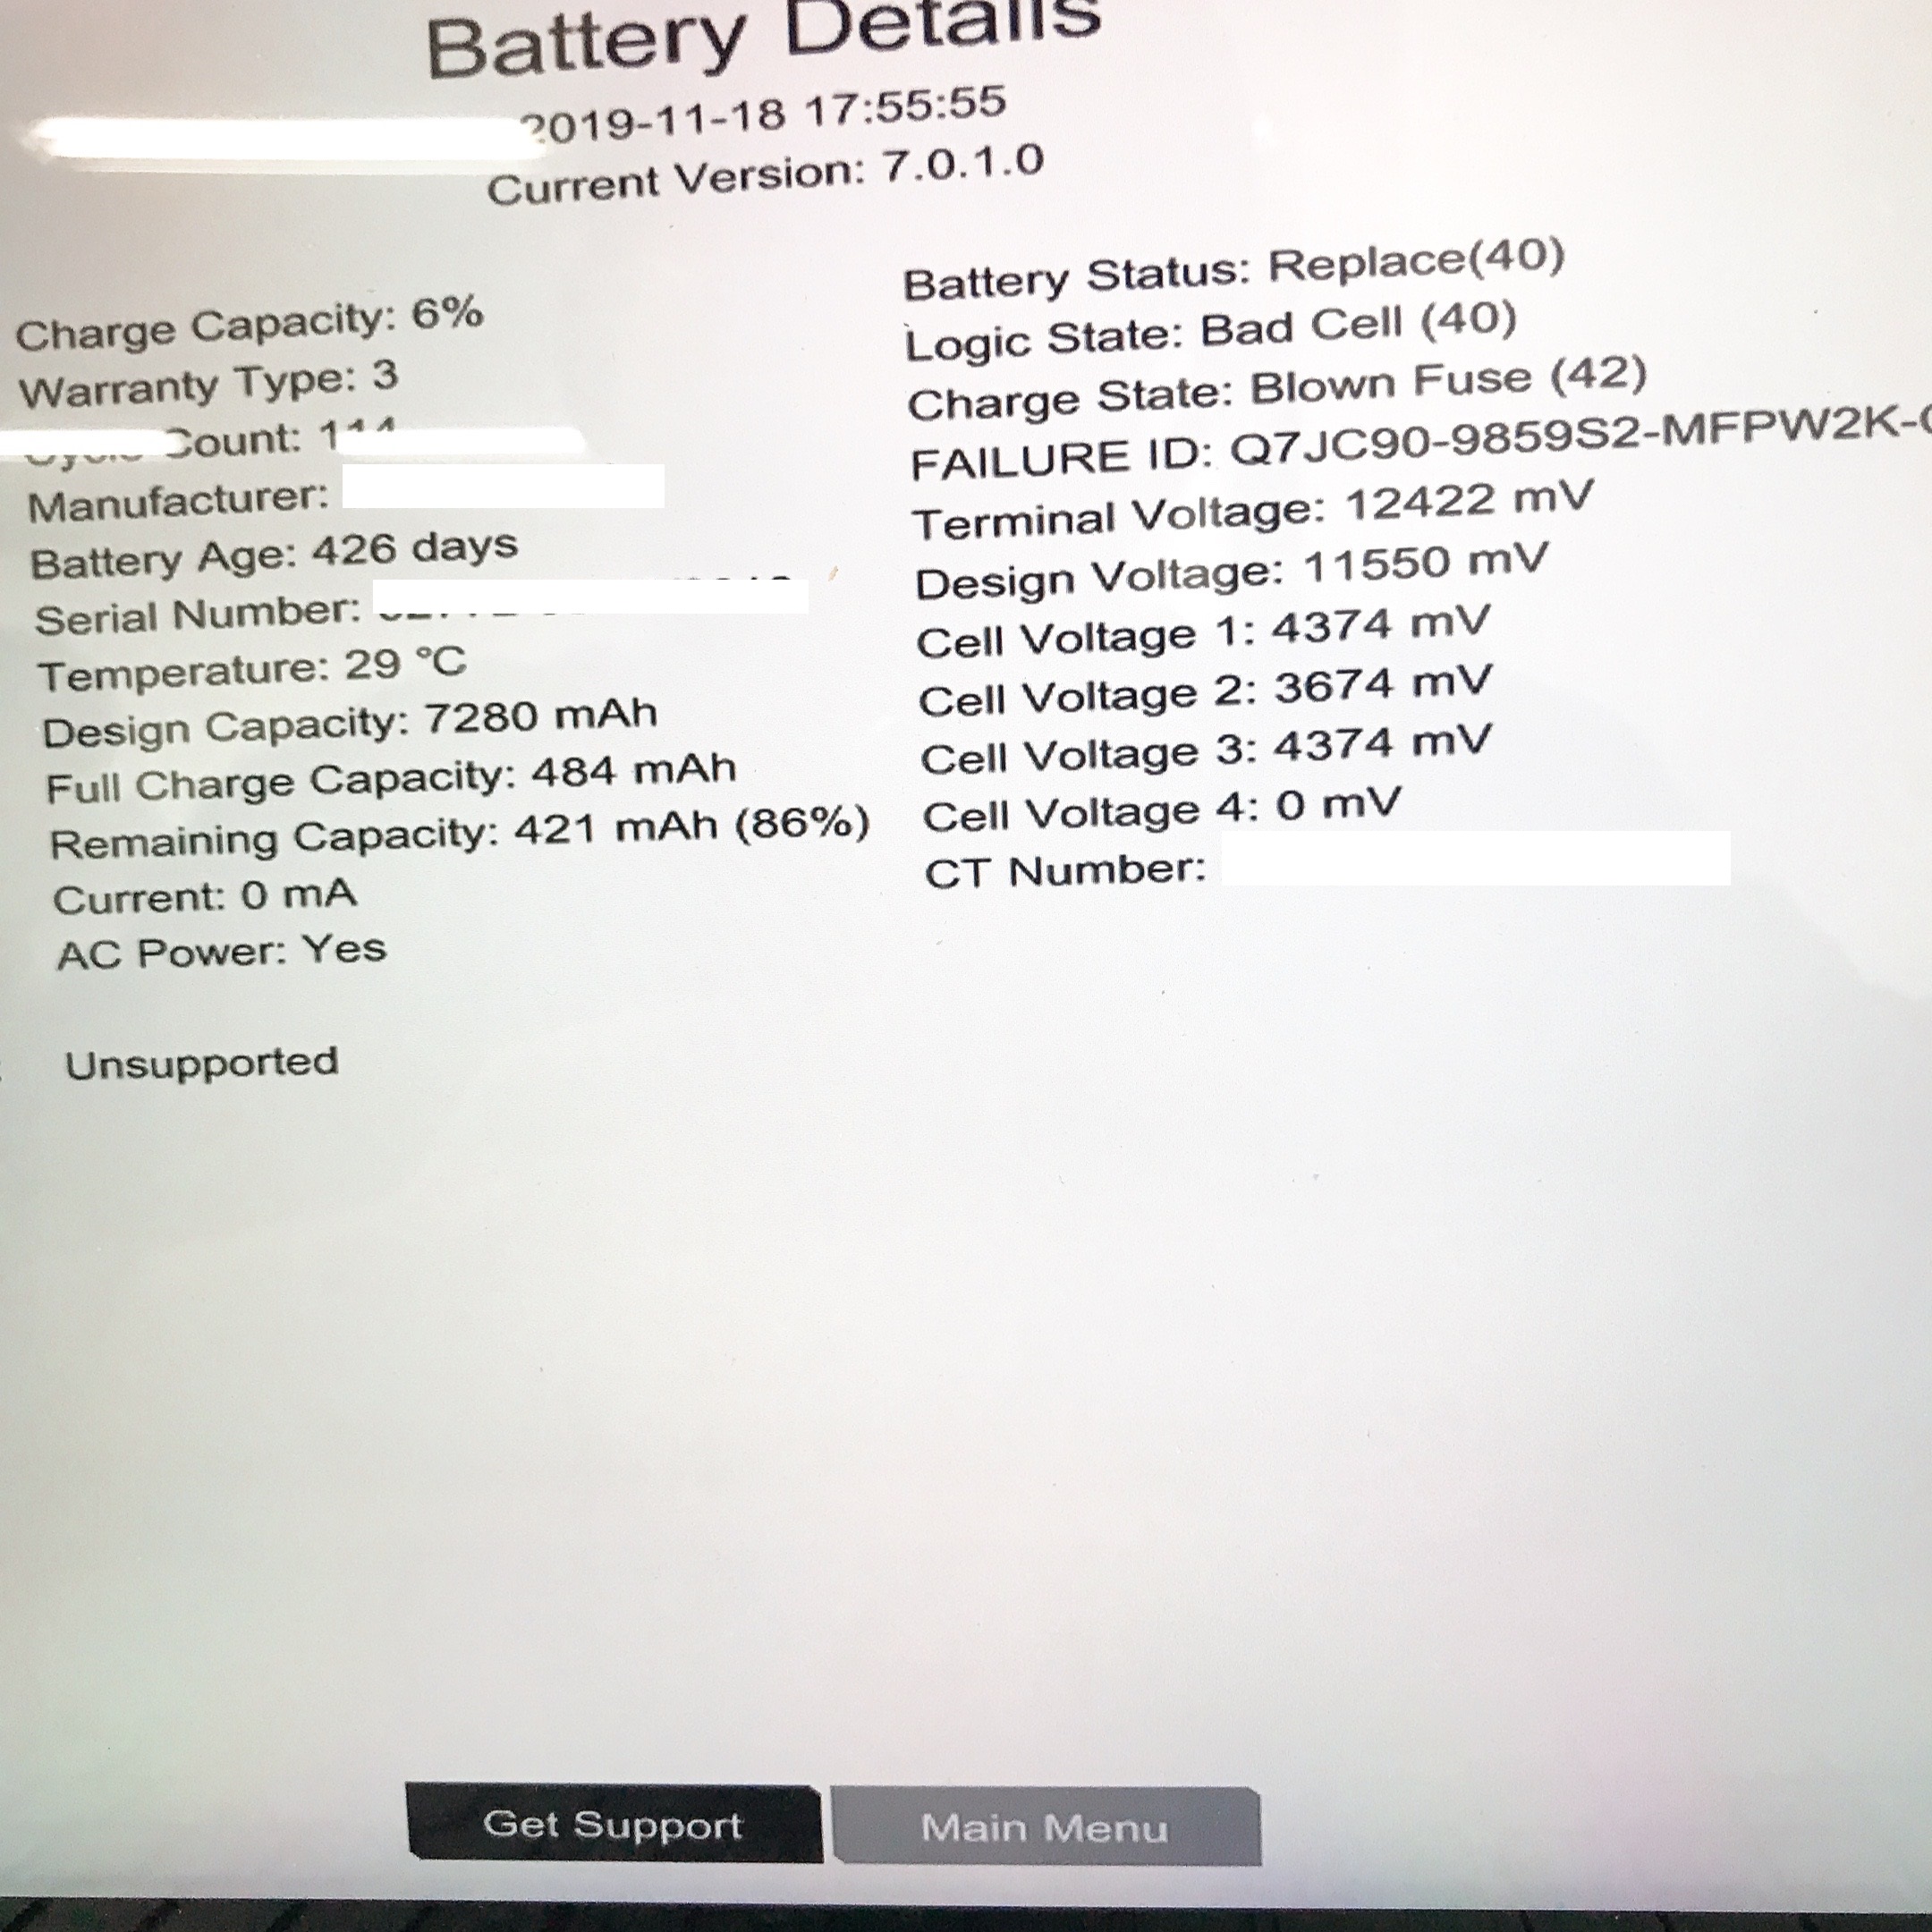 Battery 601 warning and fuse blown? - HP Support Community - 7309858